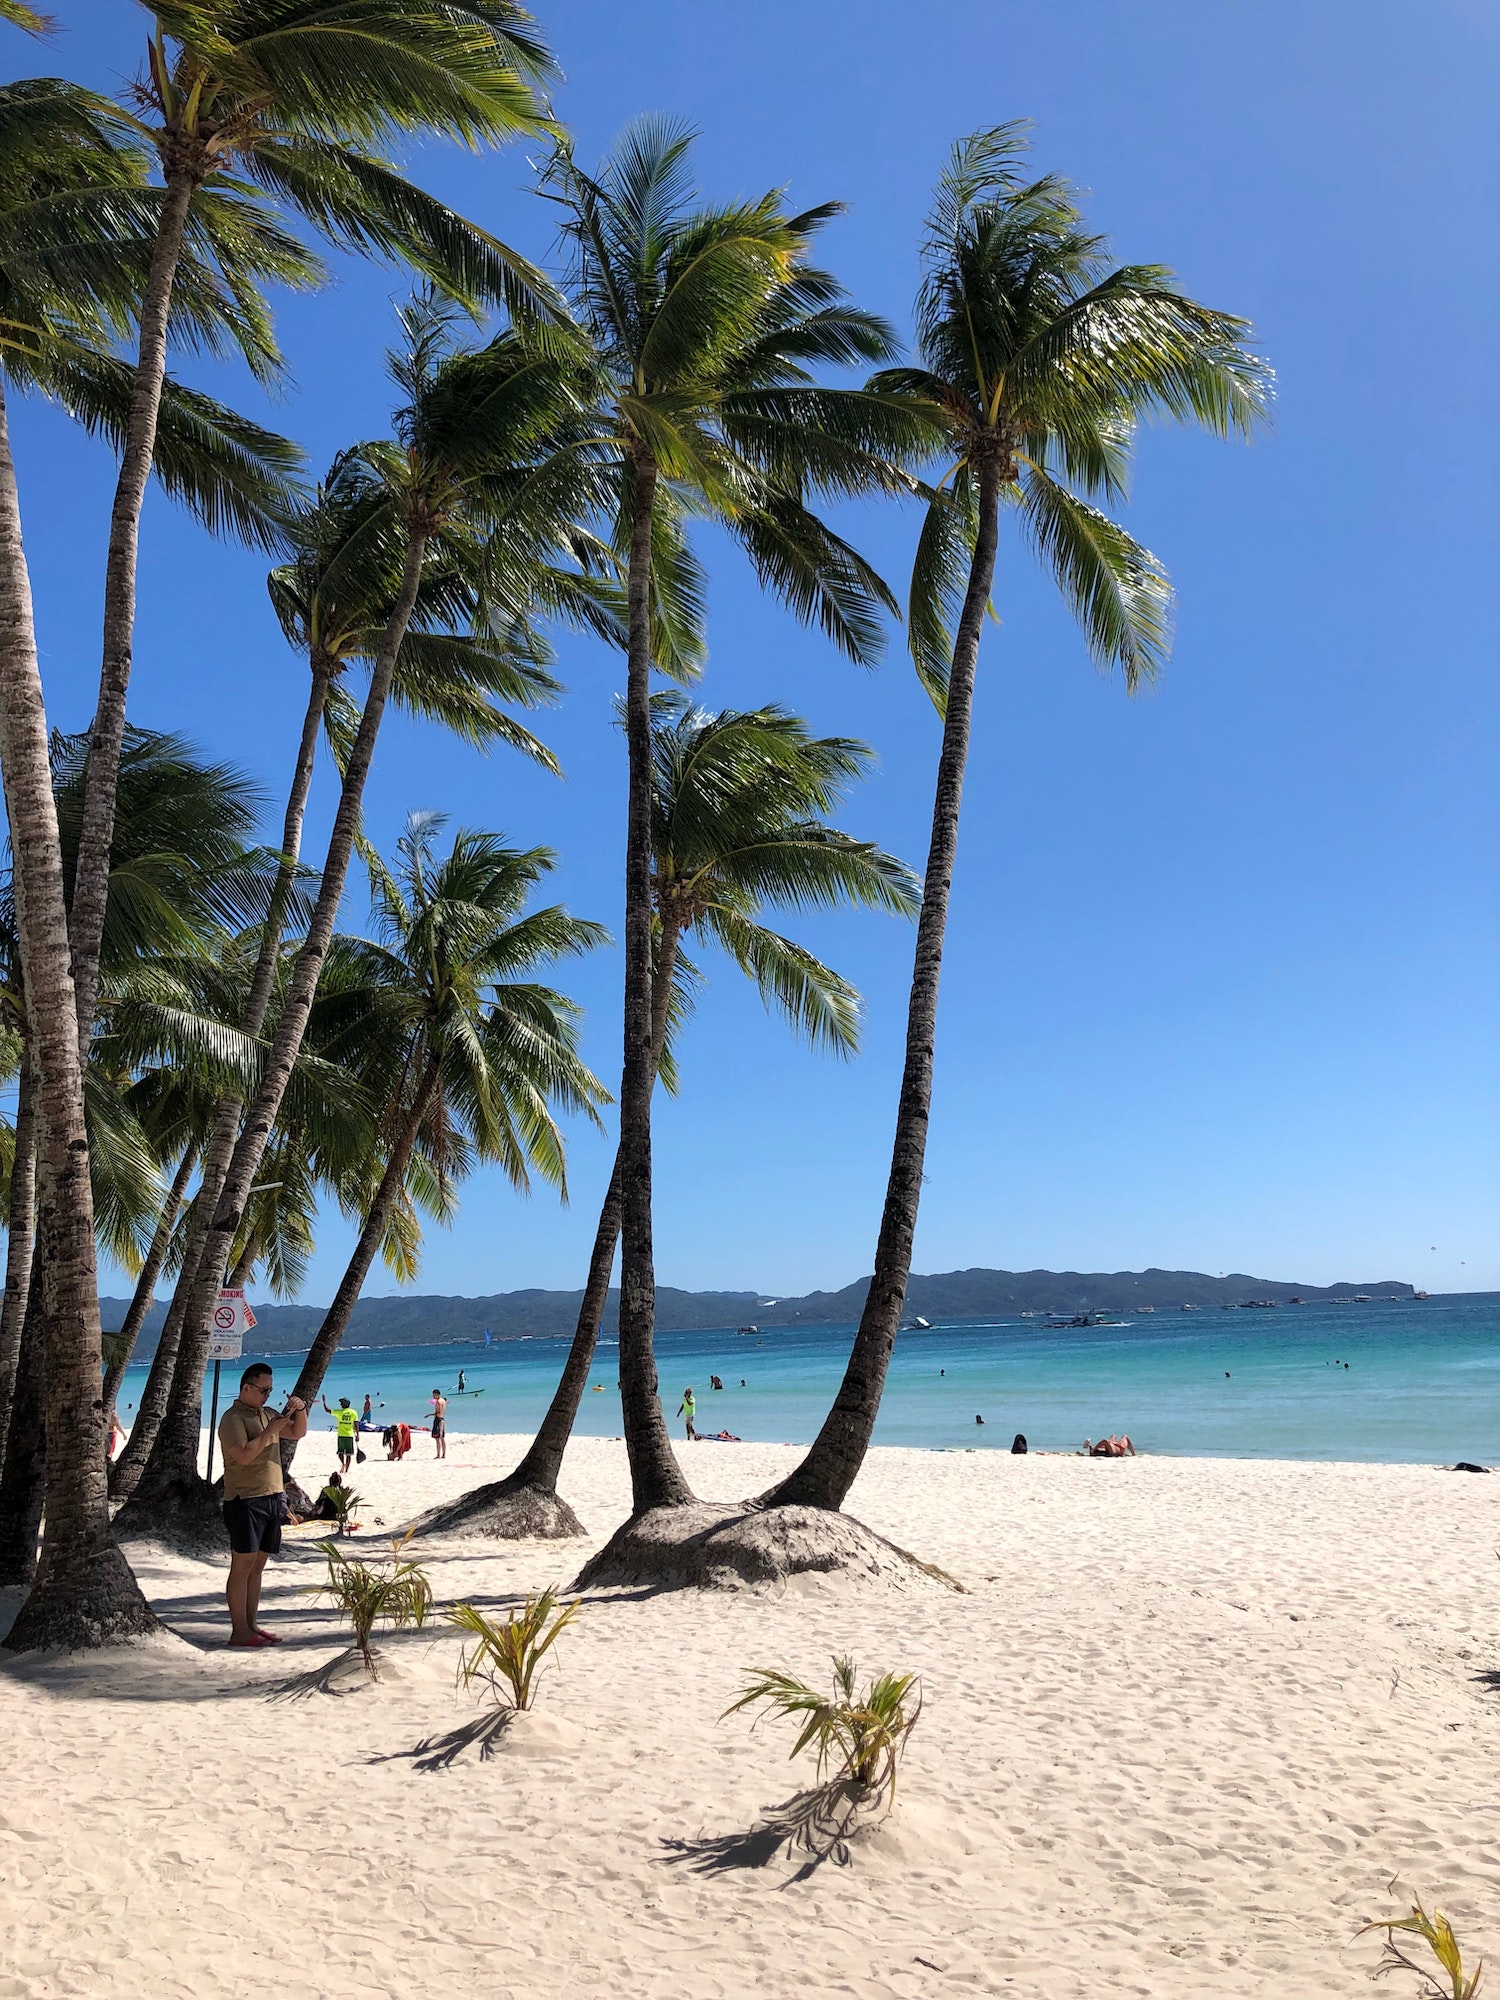 In 2017, Boracay hosted about two million tourists and earned P56.15 billion in tourism receipts